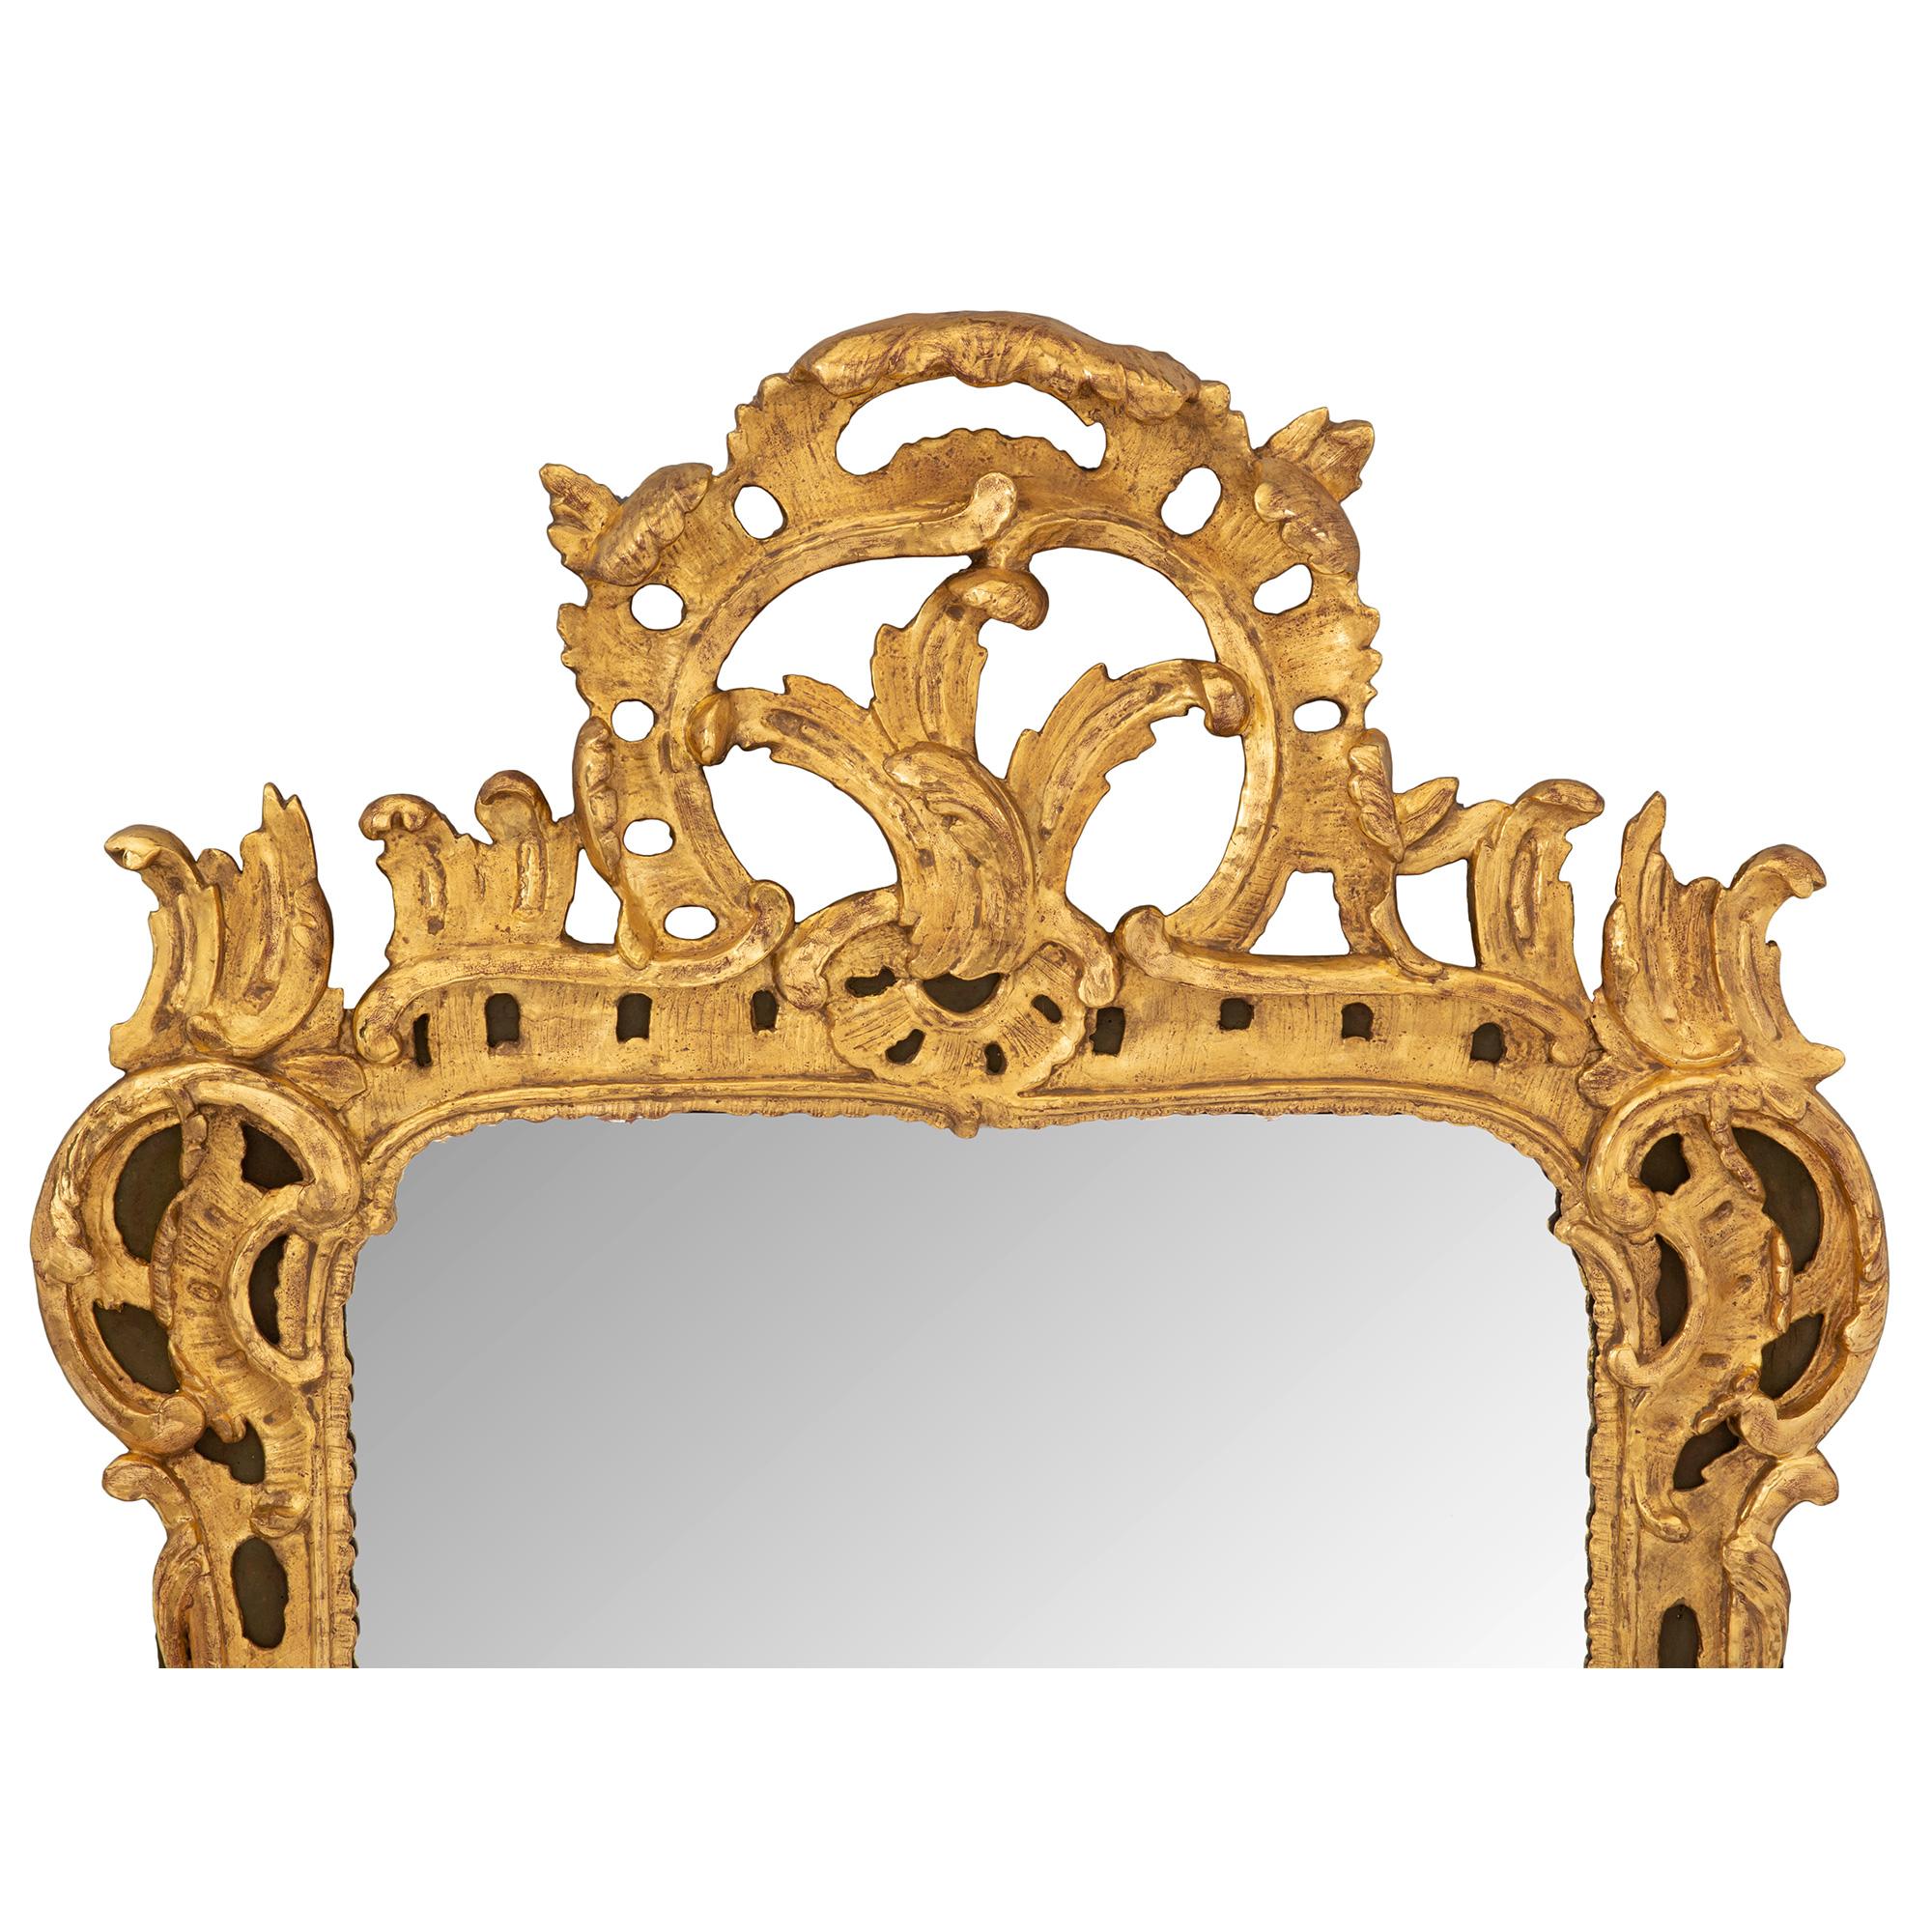 French 18th Century Régence Period Giltwood Mirror In Good Condition For Sale In West Palm Beach, FL